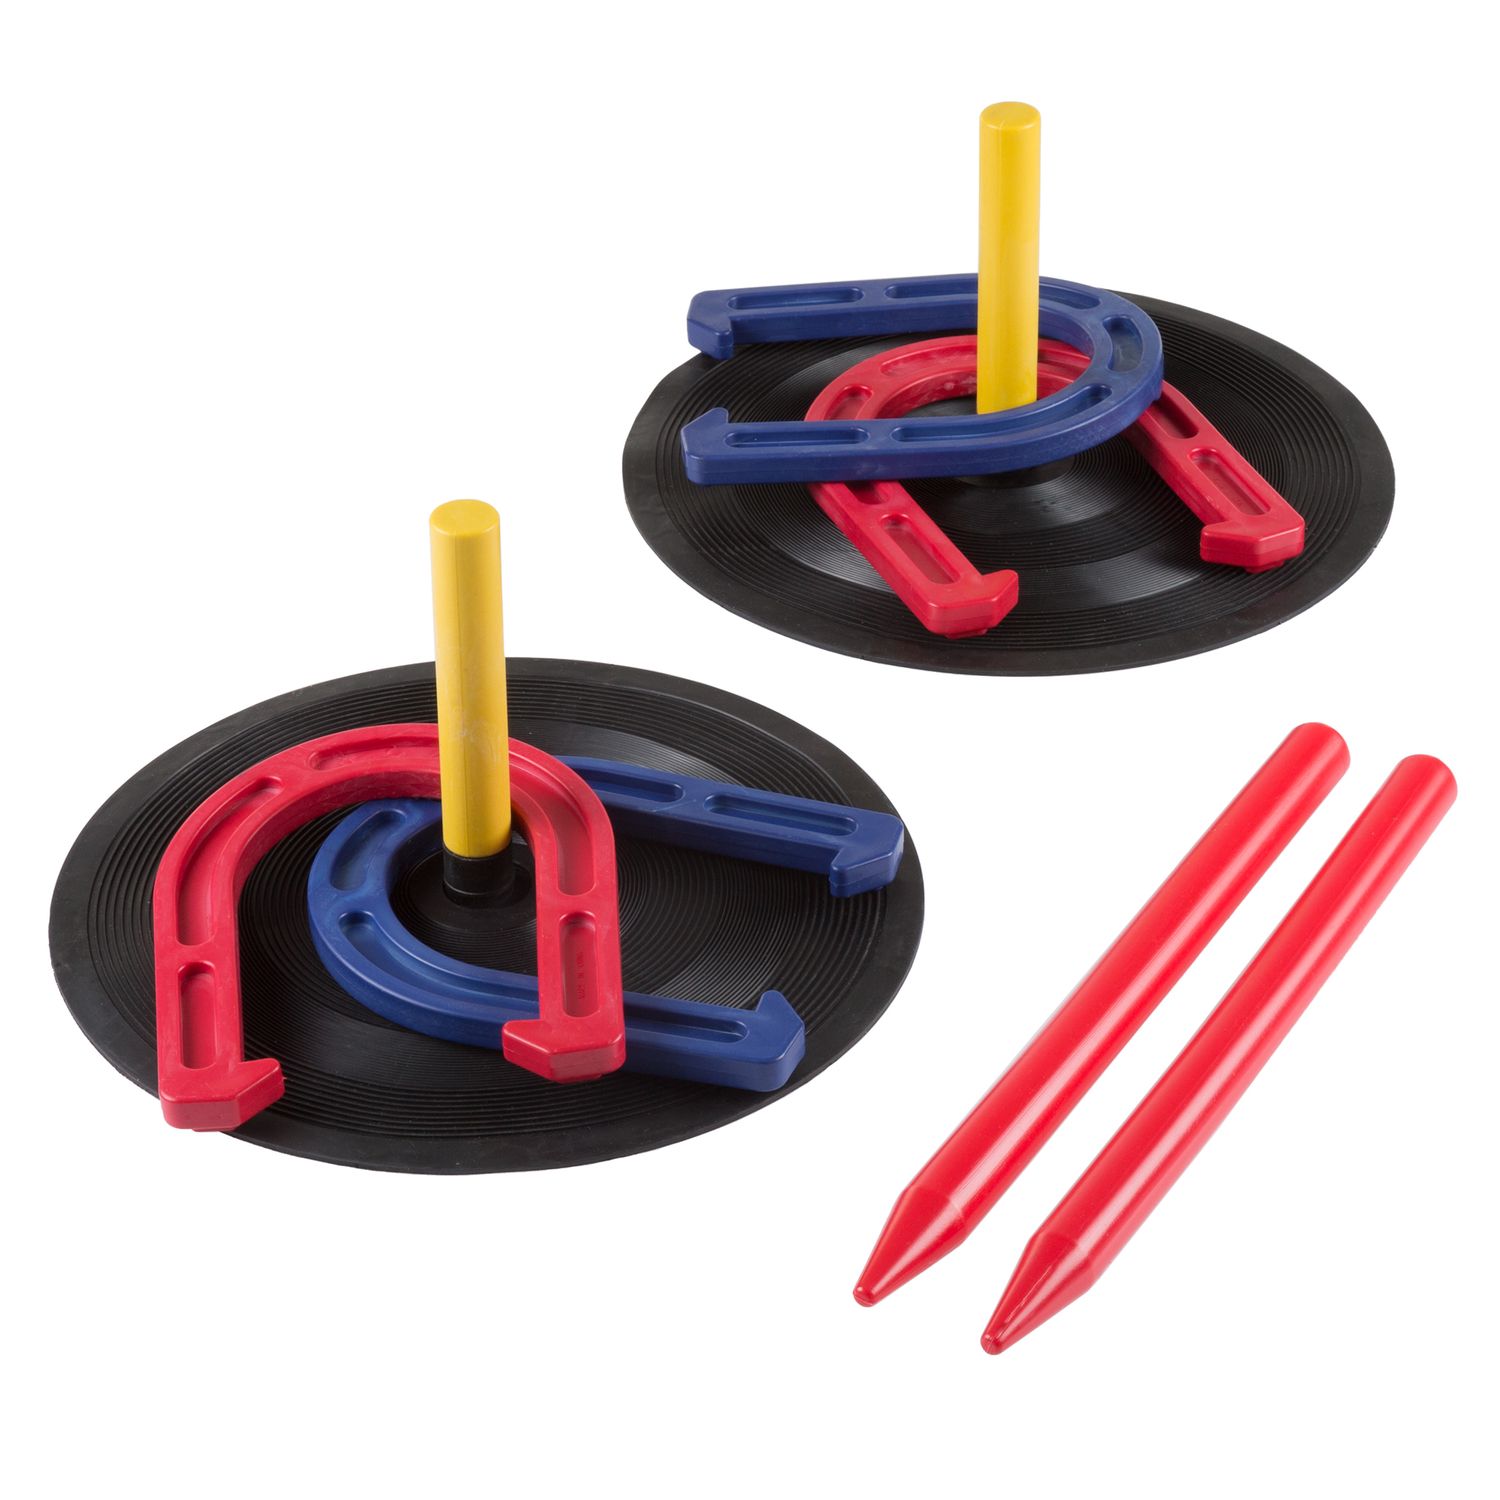 Image for Hey! Play! Rubber Horseshoes Game Set at Kohl's.